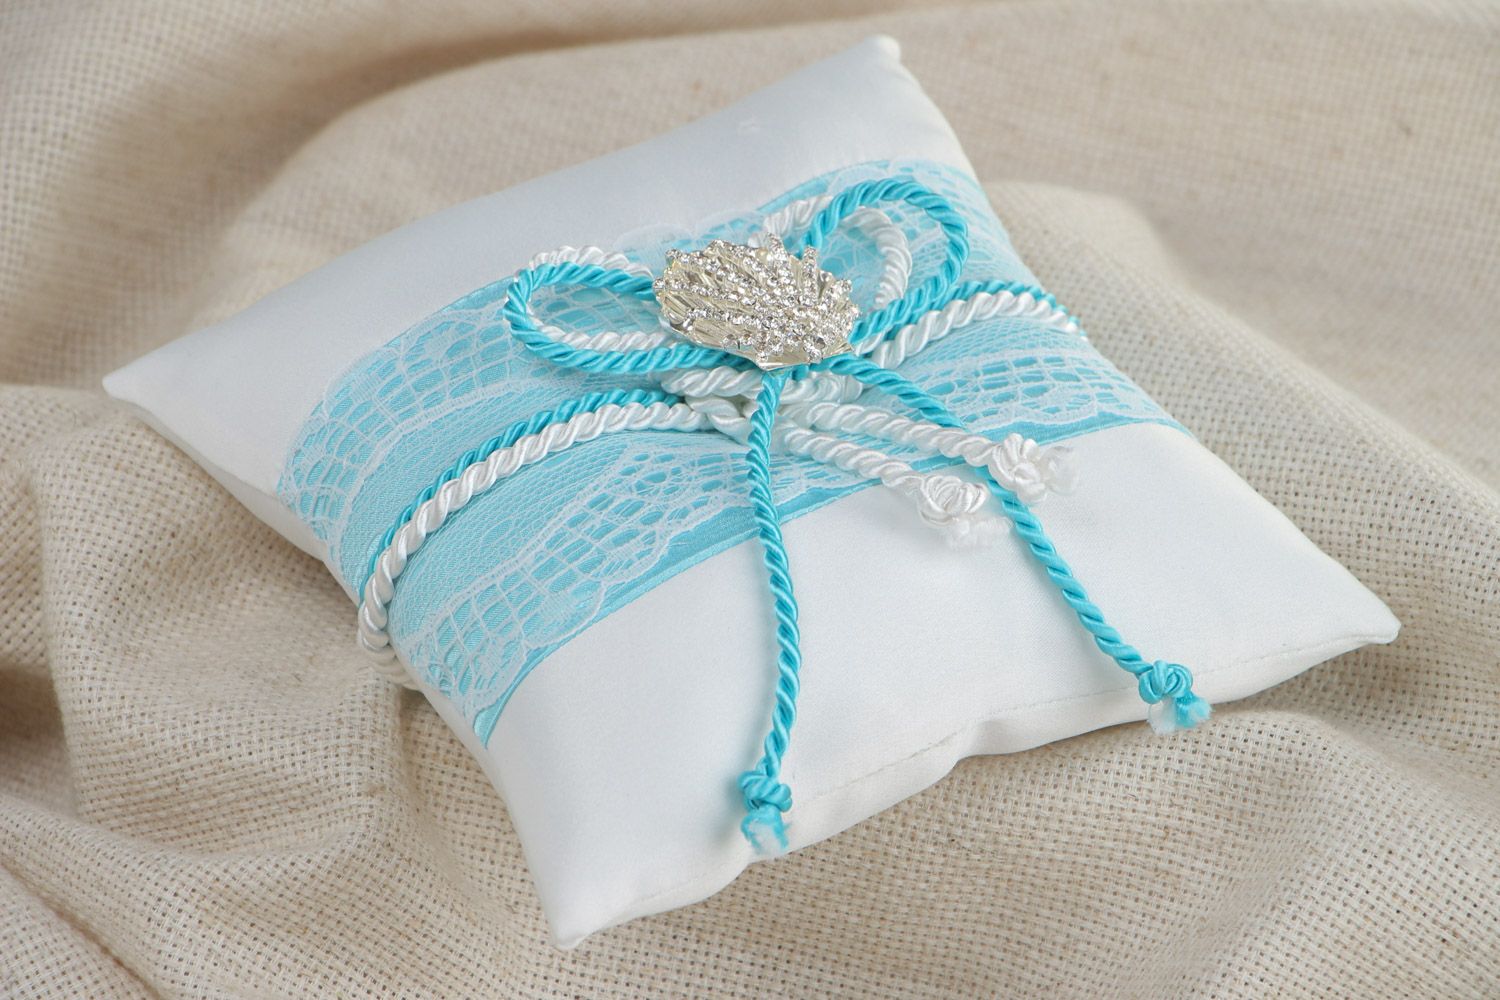 White handmade ring pillow sewn of satin with lace and decorative seashell photo 1